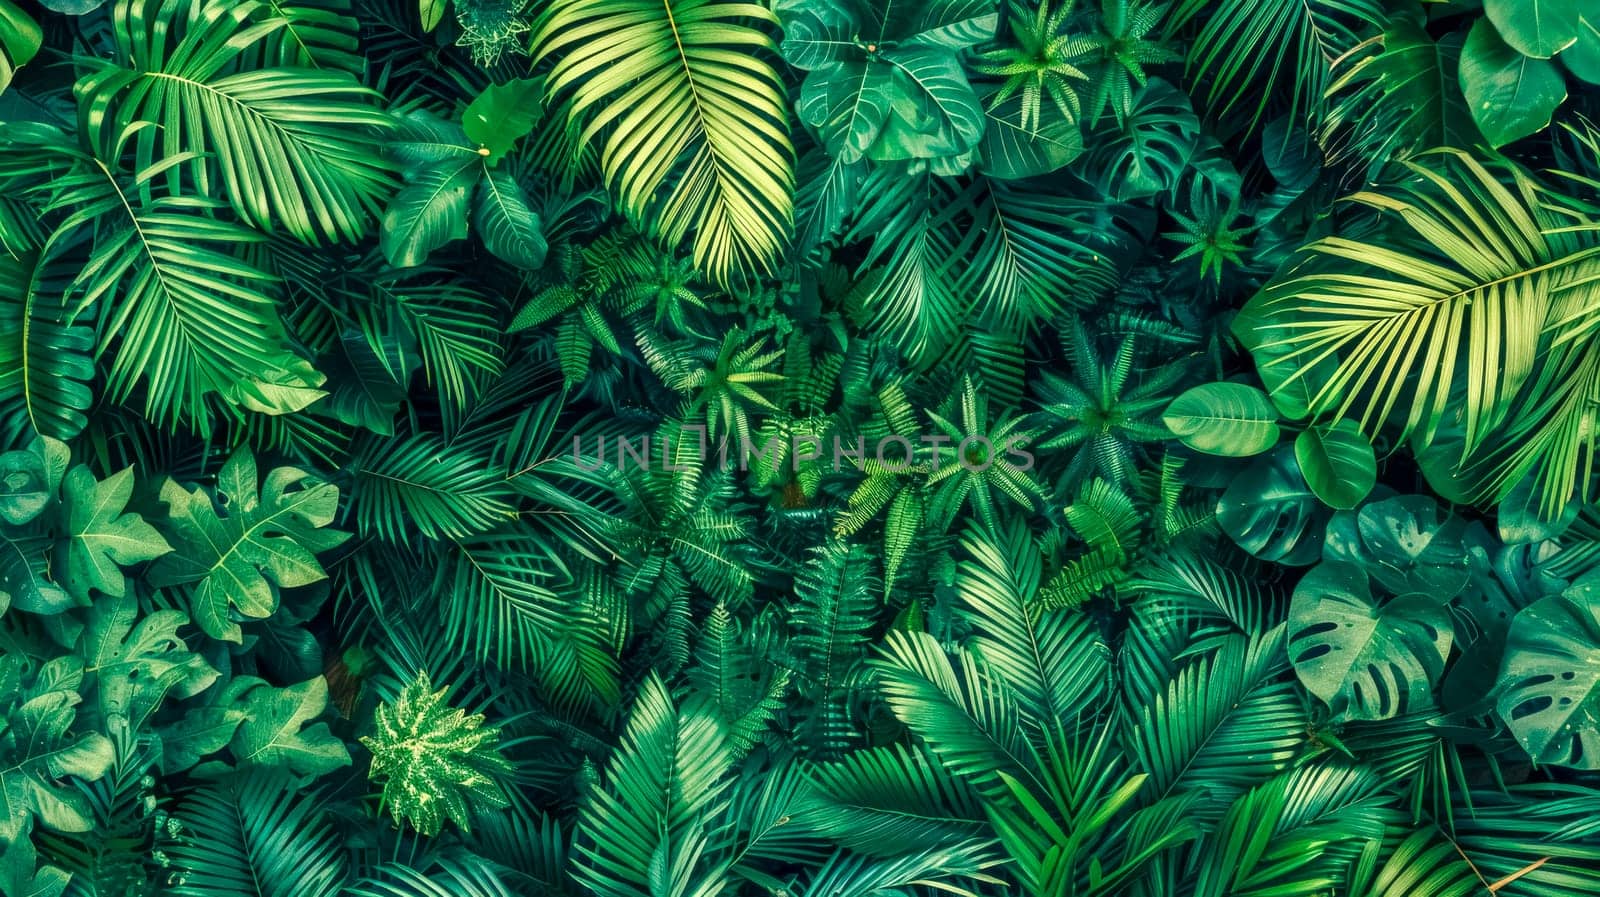 Lush background of varied green tropical leaves in a dense pattern by Edophoto